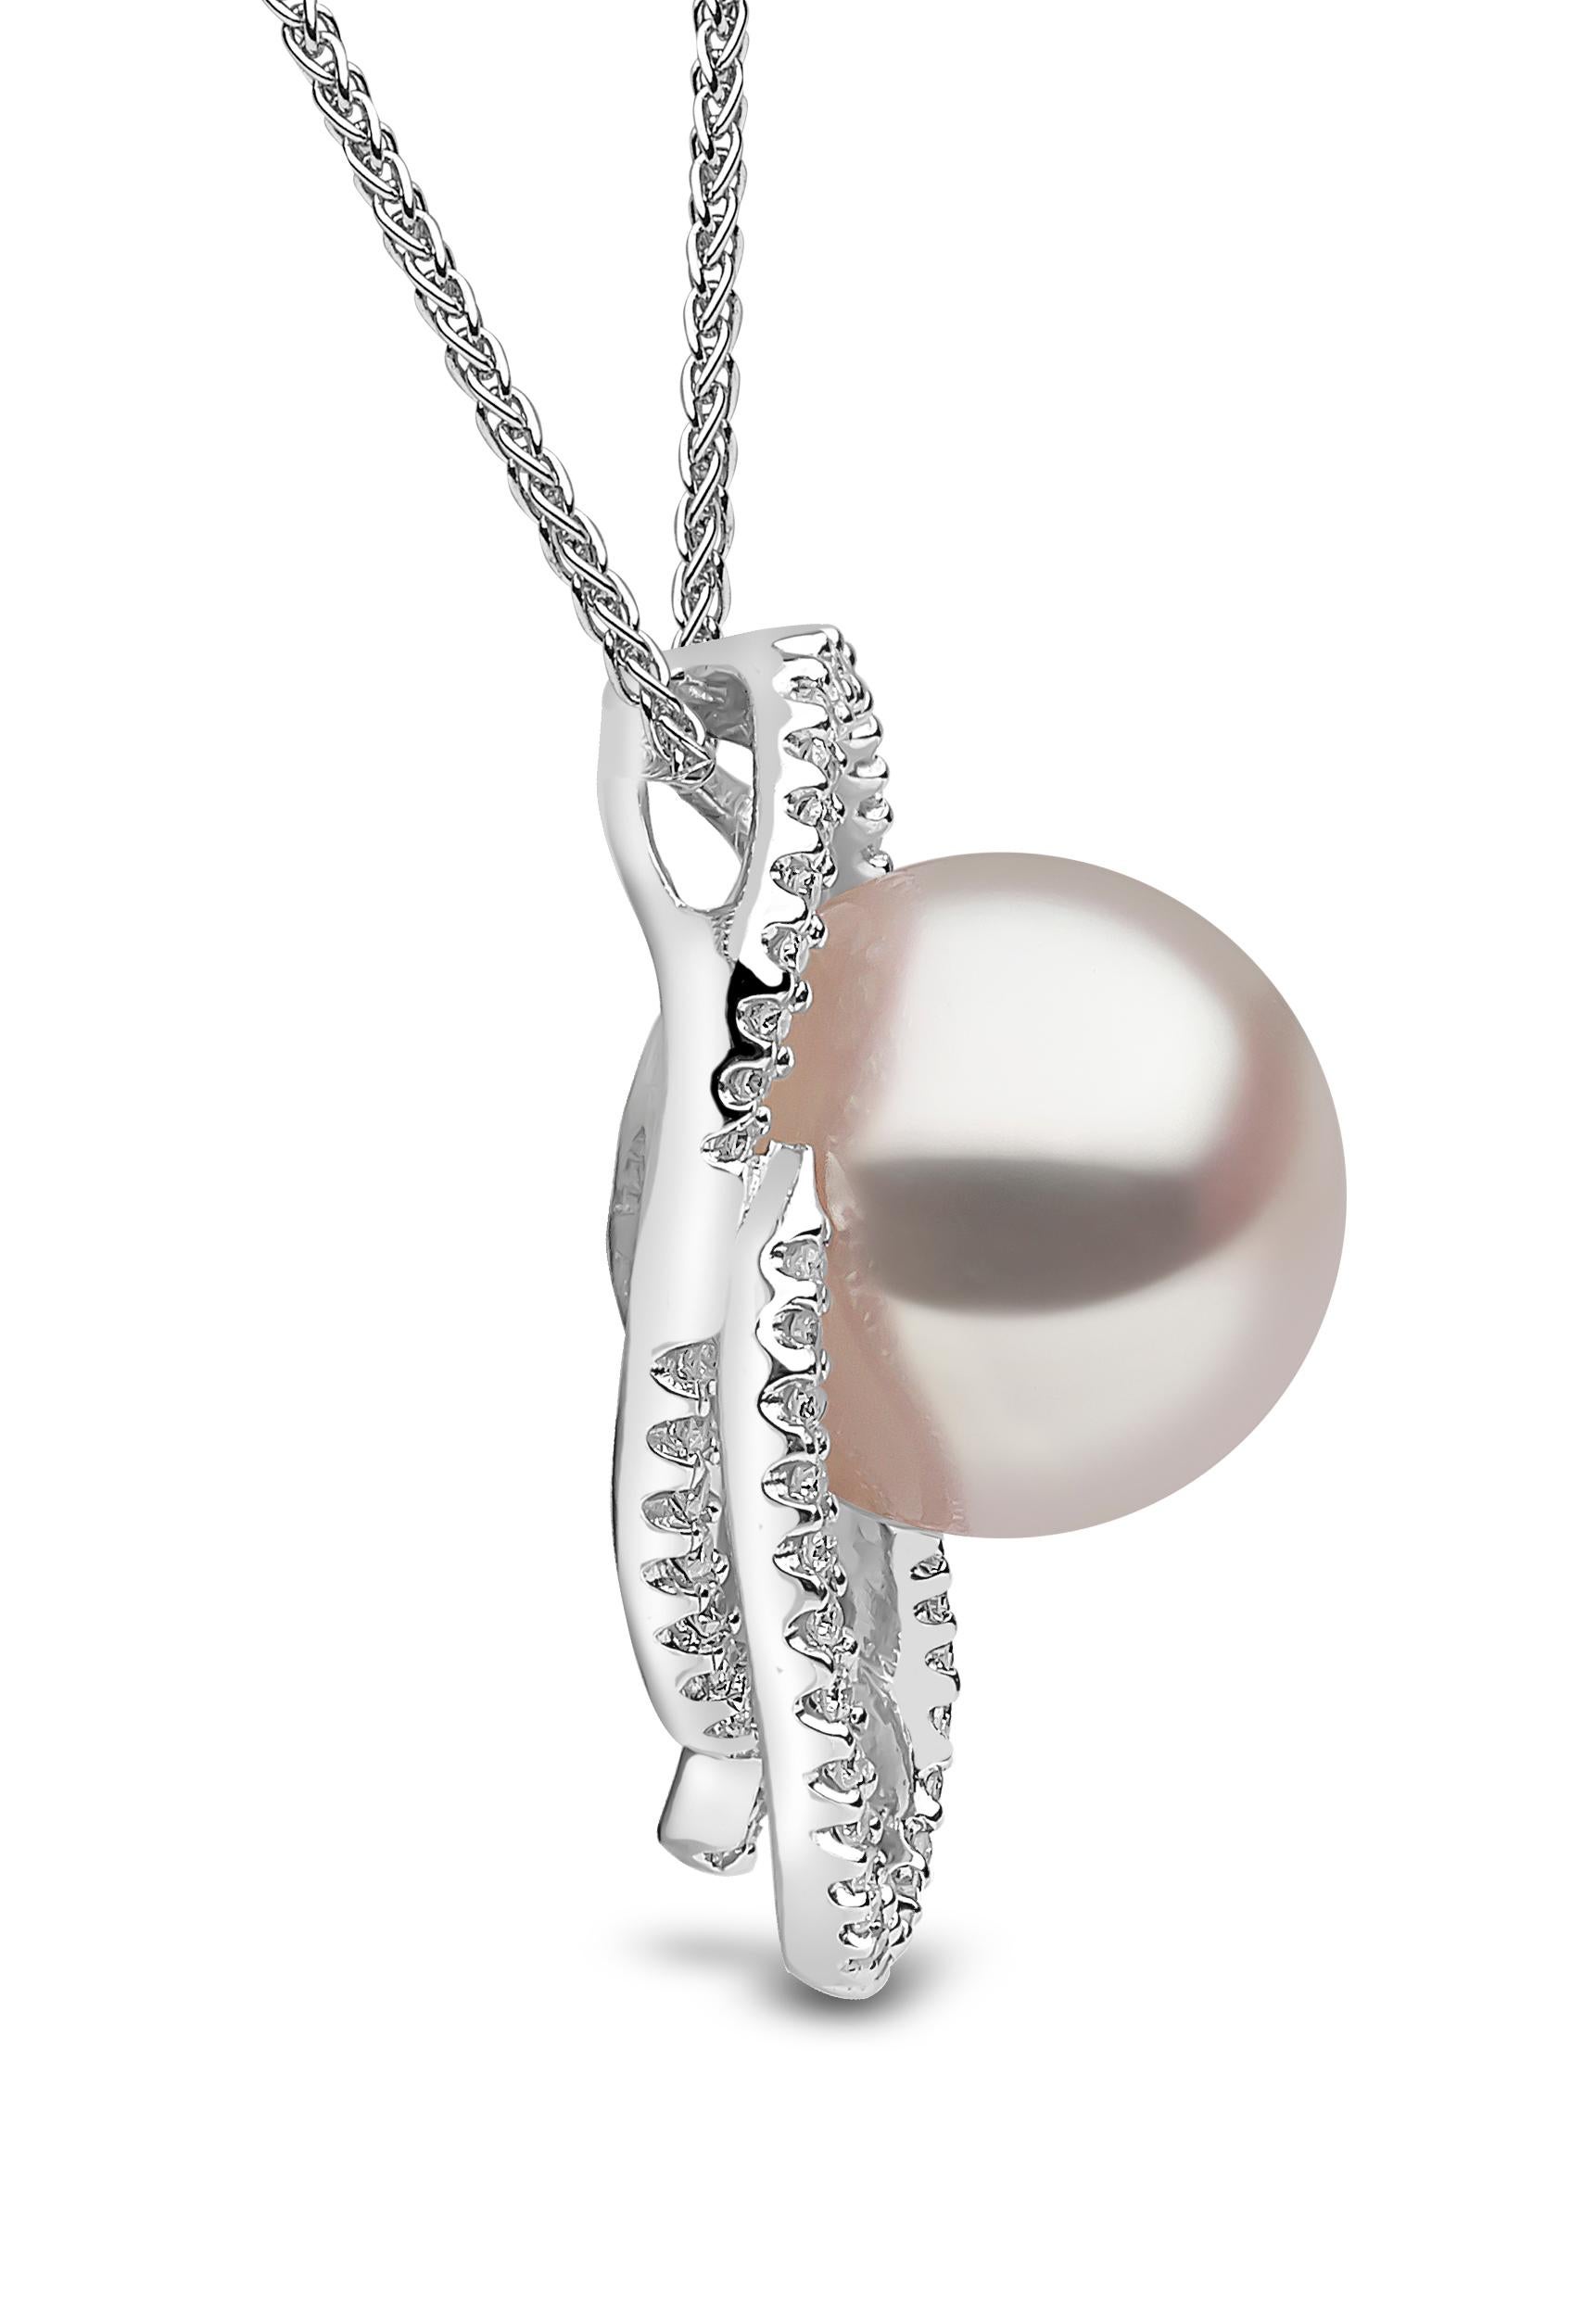 This unique pendant design from Yoko London features a lustrous Australian South Sea pearl set amongst a contemporary design of diamonds. Set in 18 Karat white gold to enrich the sparkle of the diamonds and the lustre of the pearl, this elegant